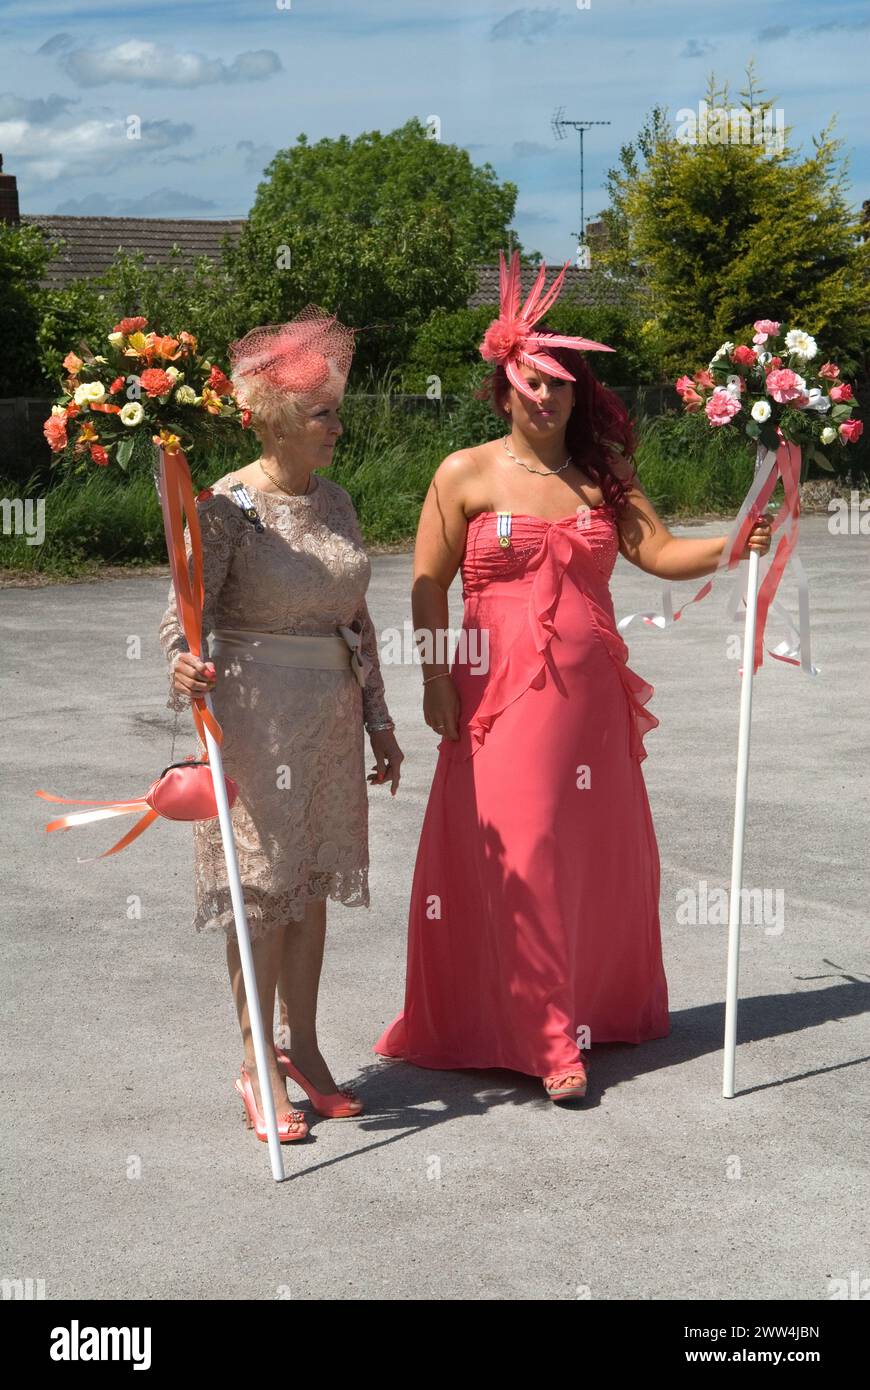 Smartly dressed women take part in annual village festival. Neston Female Friendly Society Annual Club Walking Day. Now knows as the Ladies Club. Neston, Cheshire, England 4th June 2015. 2010s UK HOMER SYKES Stock Photo